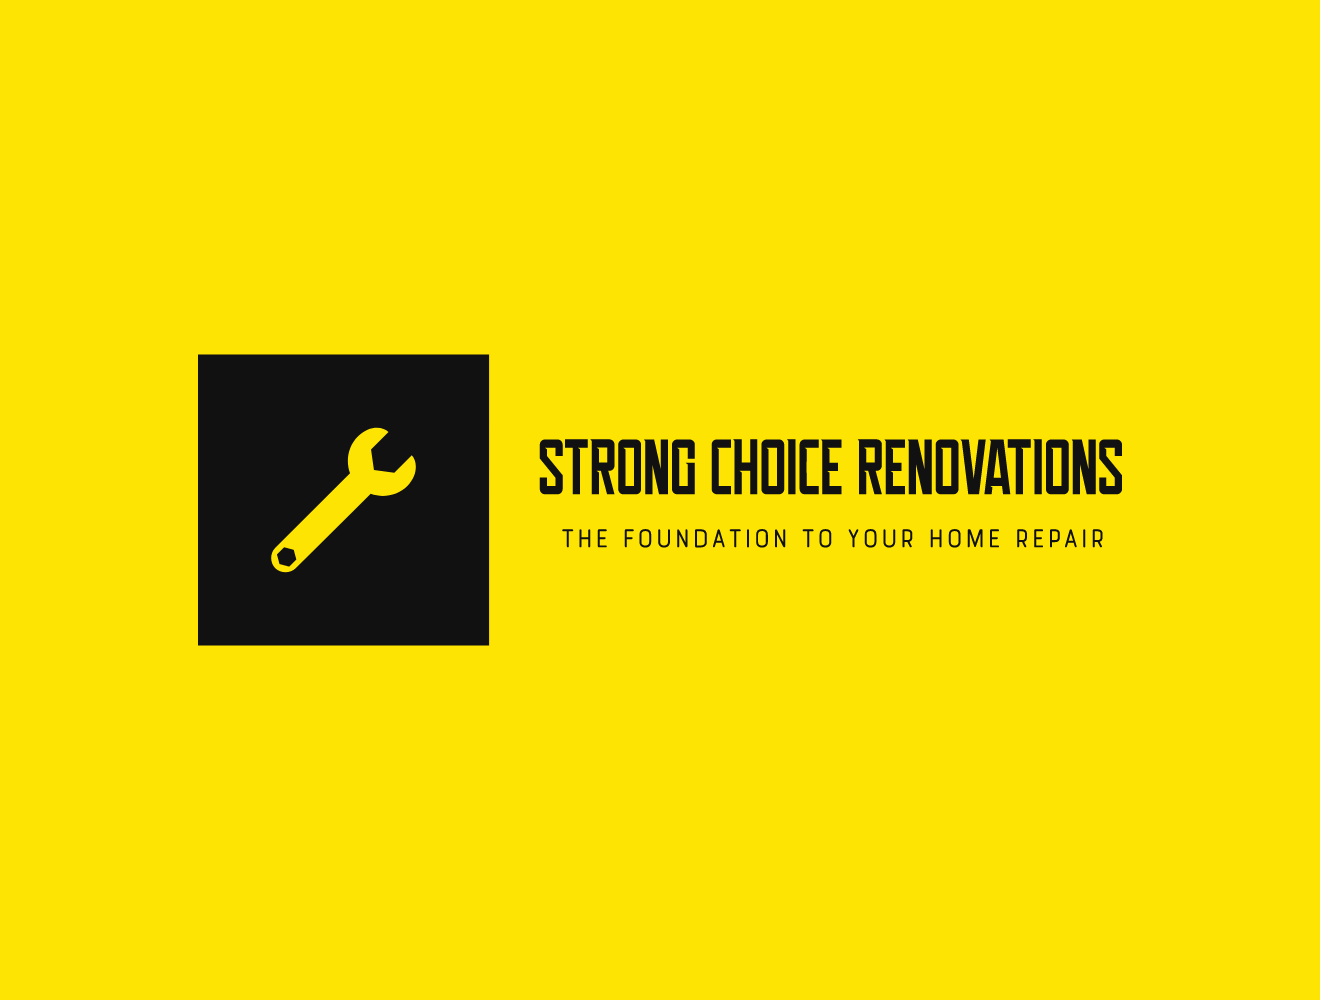 Strong Choice Renovations-Unlicensed Contractor Logo